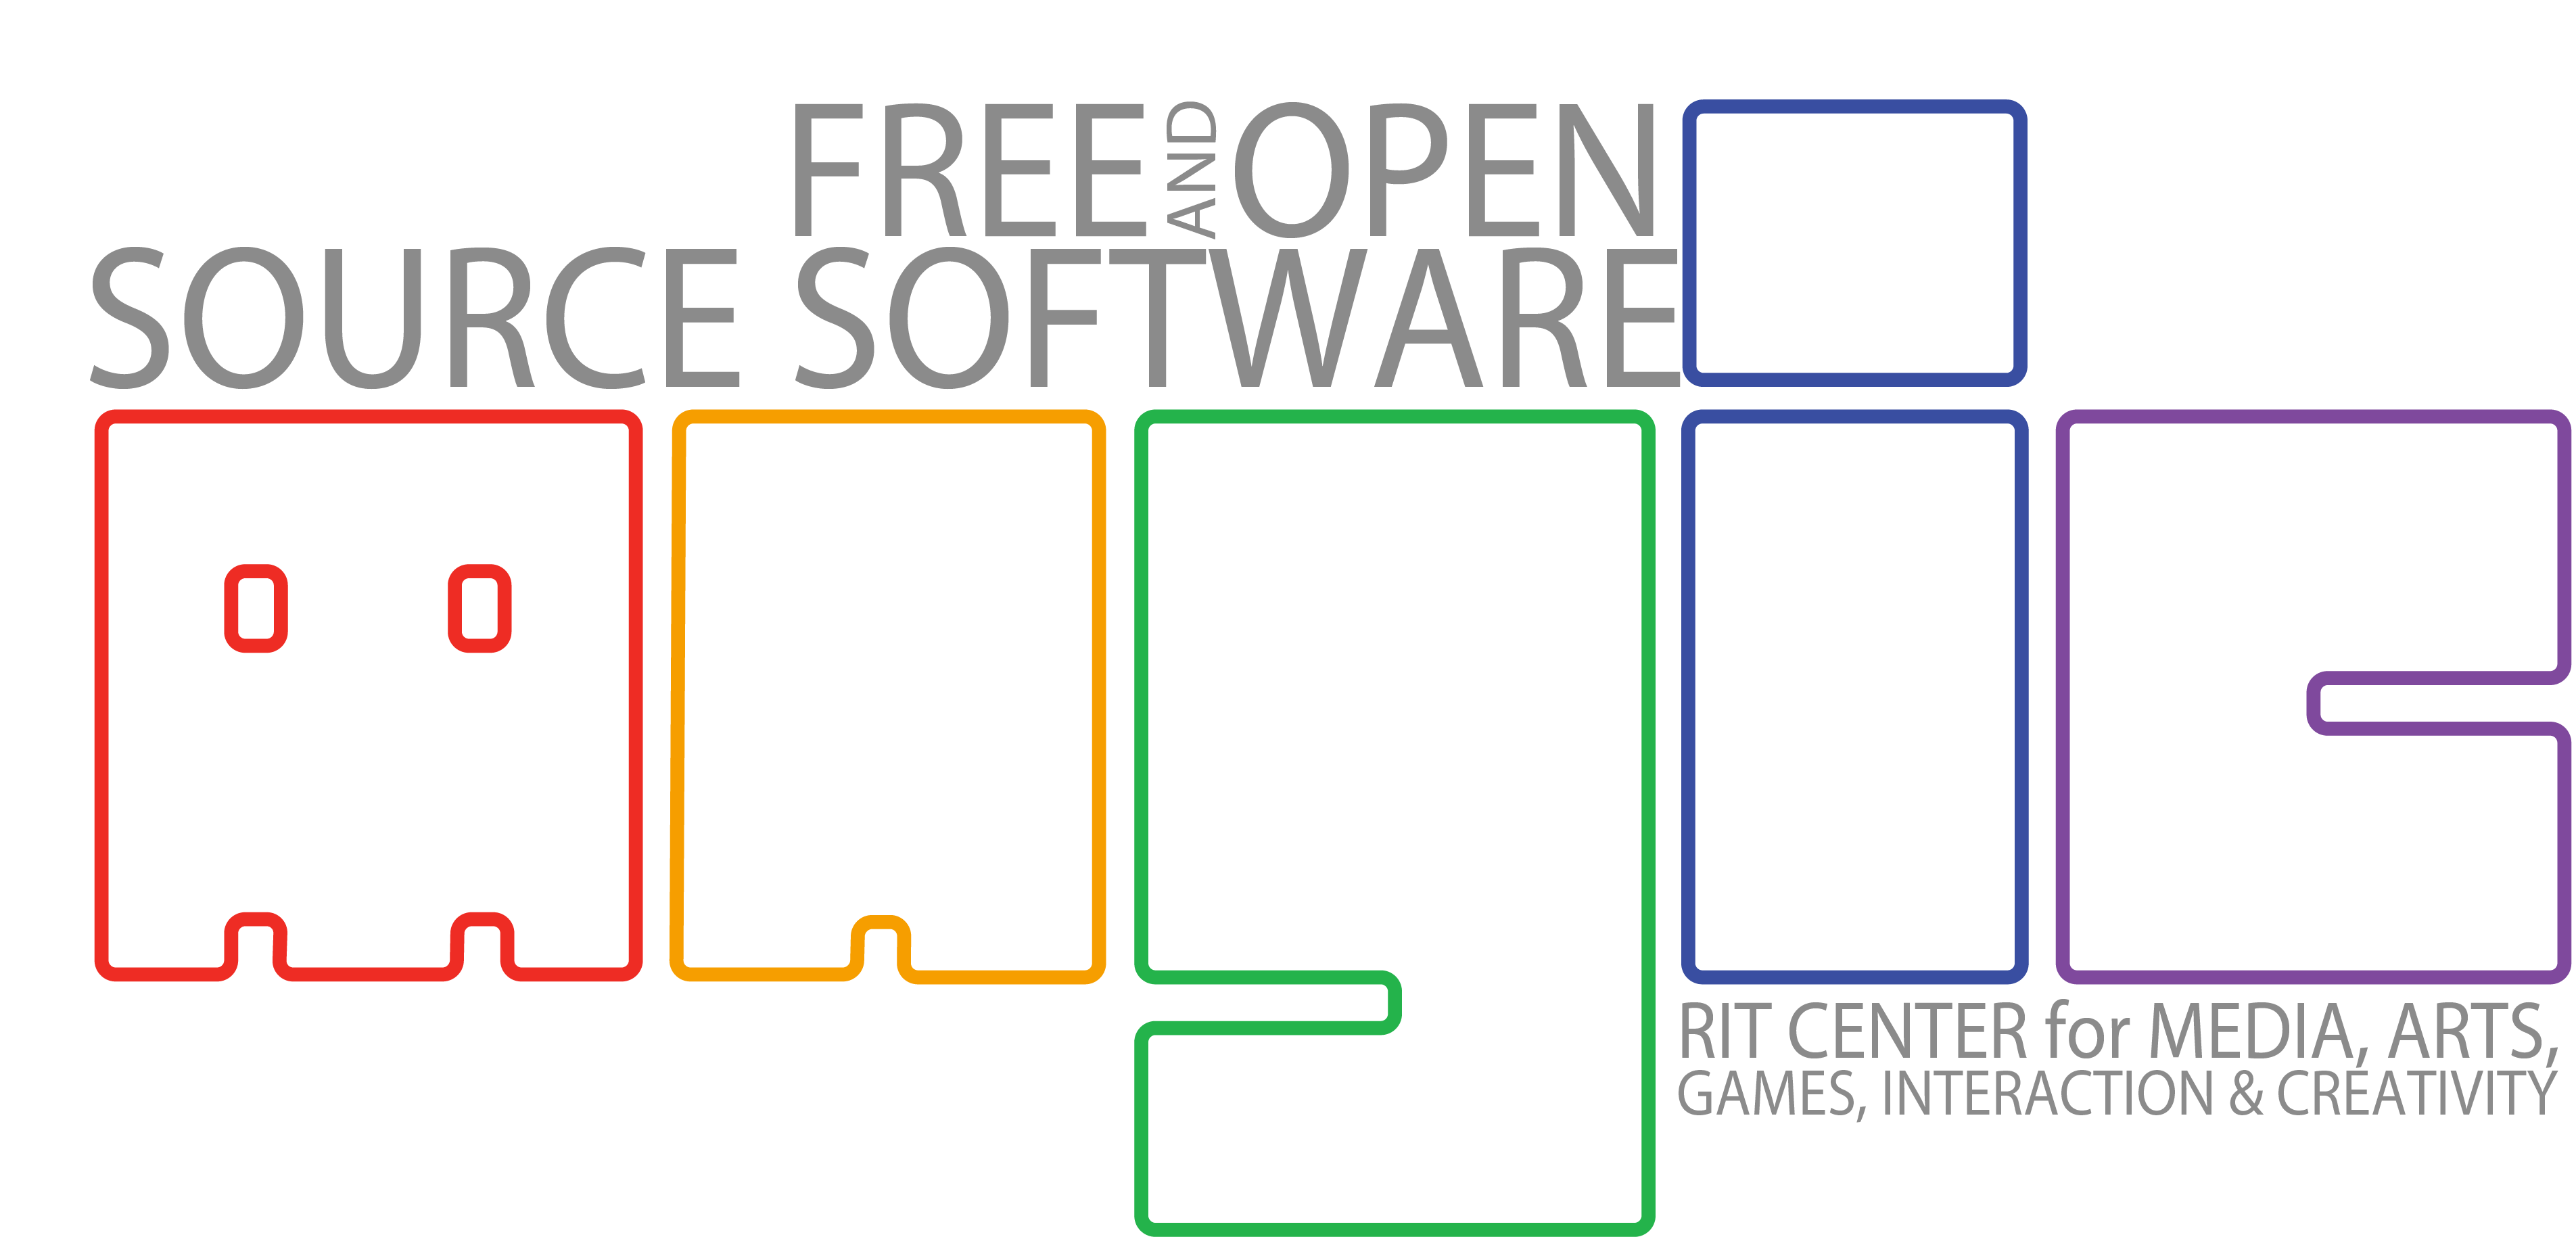 Free and Open Source Software @ MAGIC